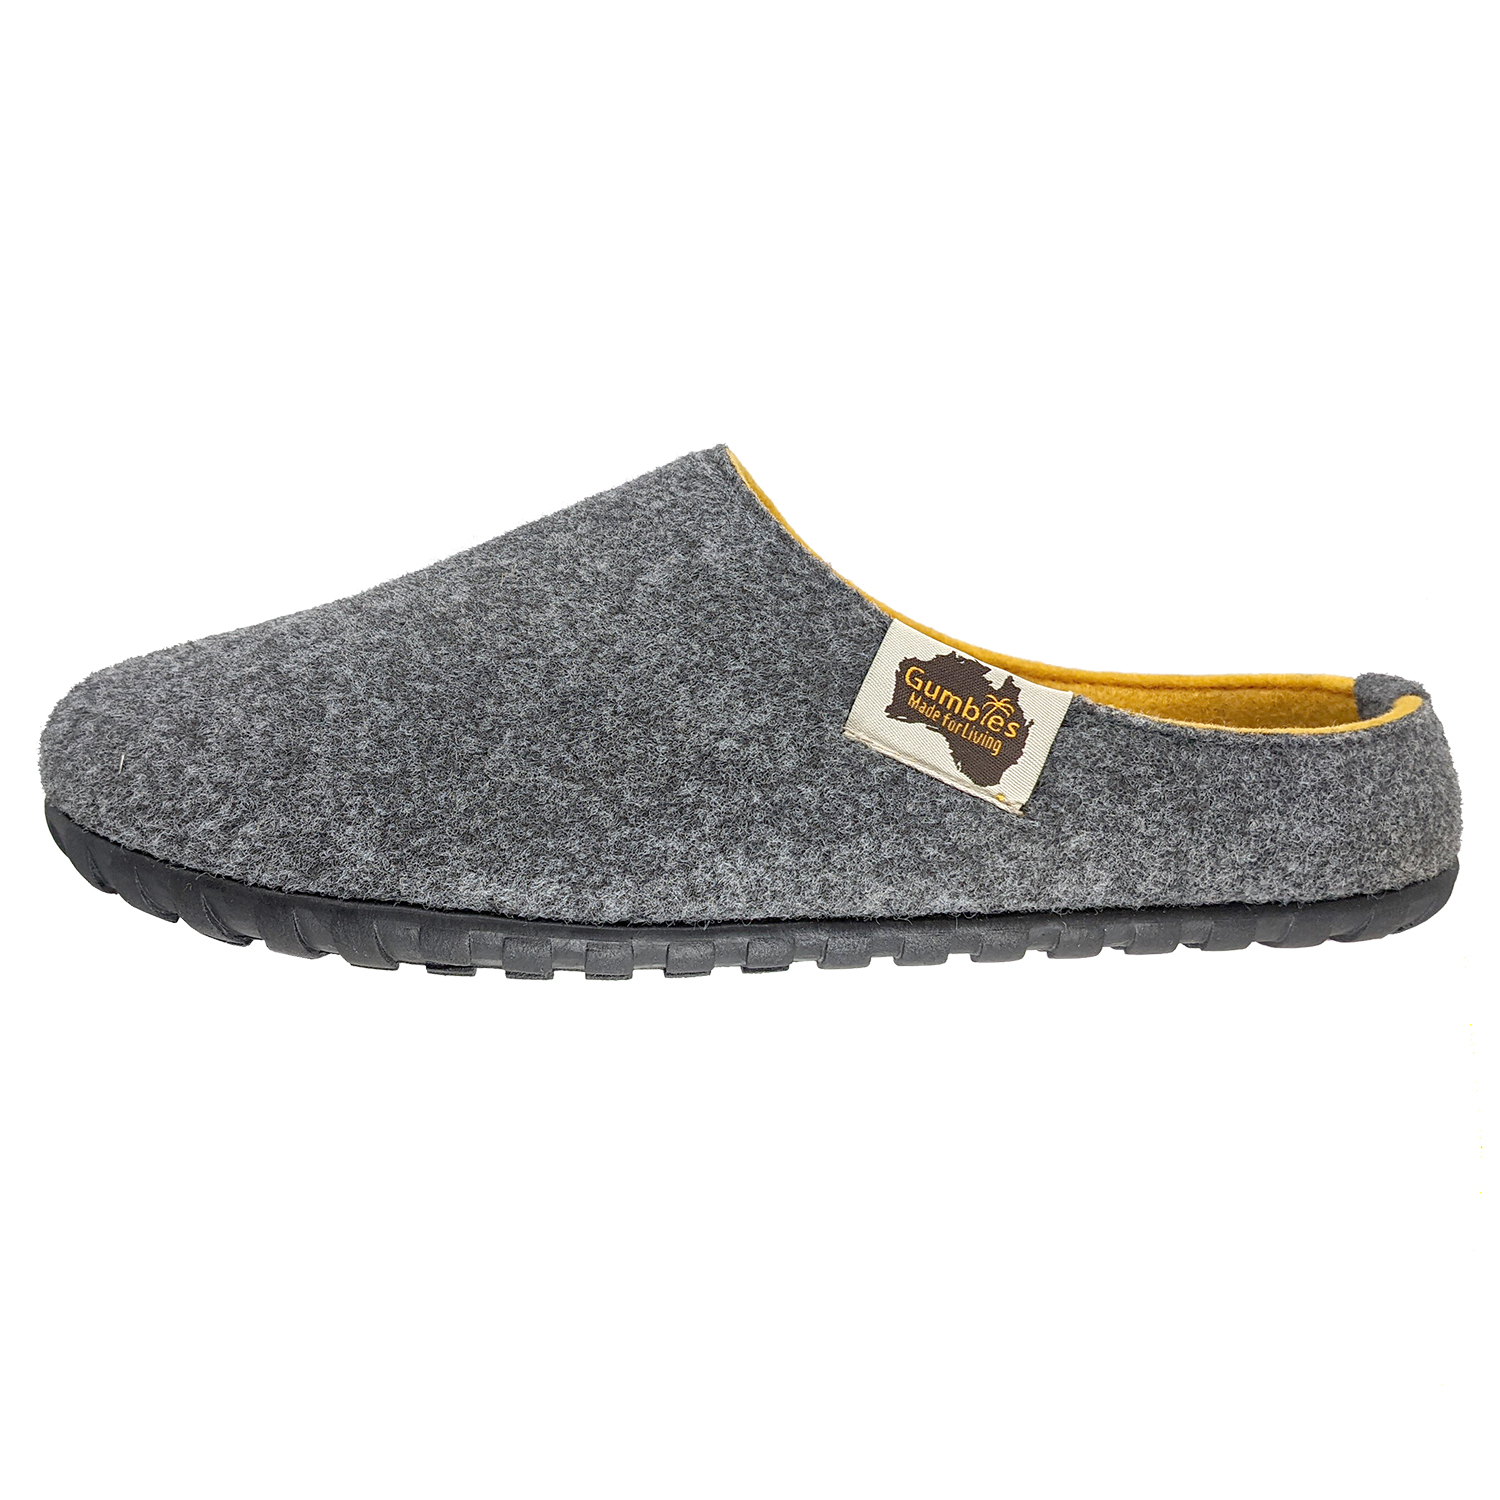 GUMBIES - Outback Slipper, GREY-CURRY